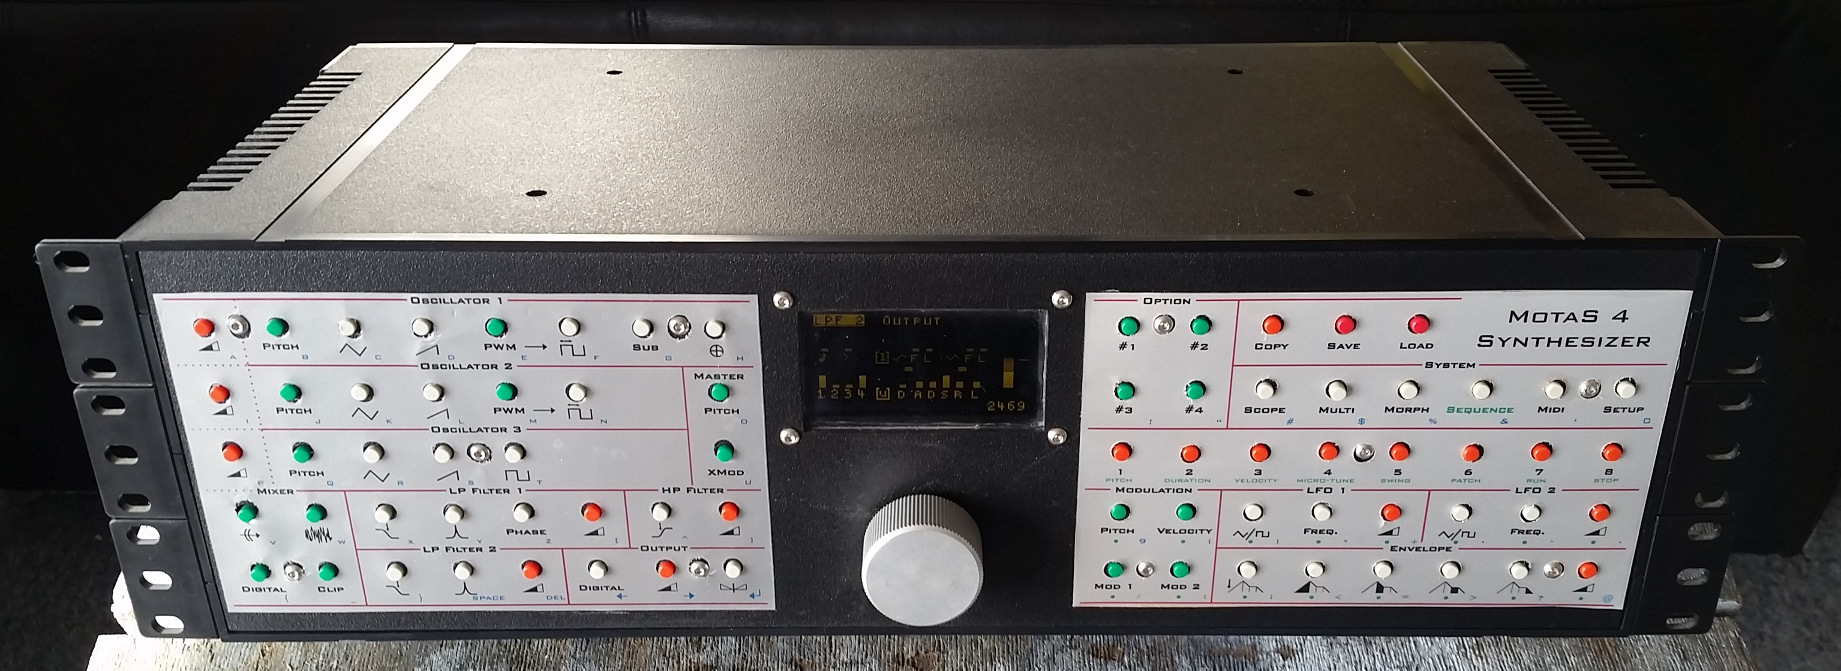 Motas4 analogue synthesizer in a plastic finish